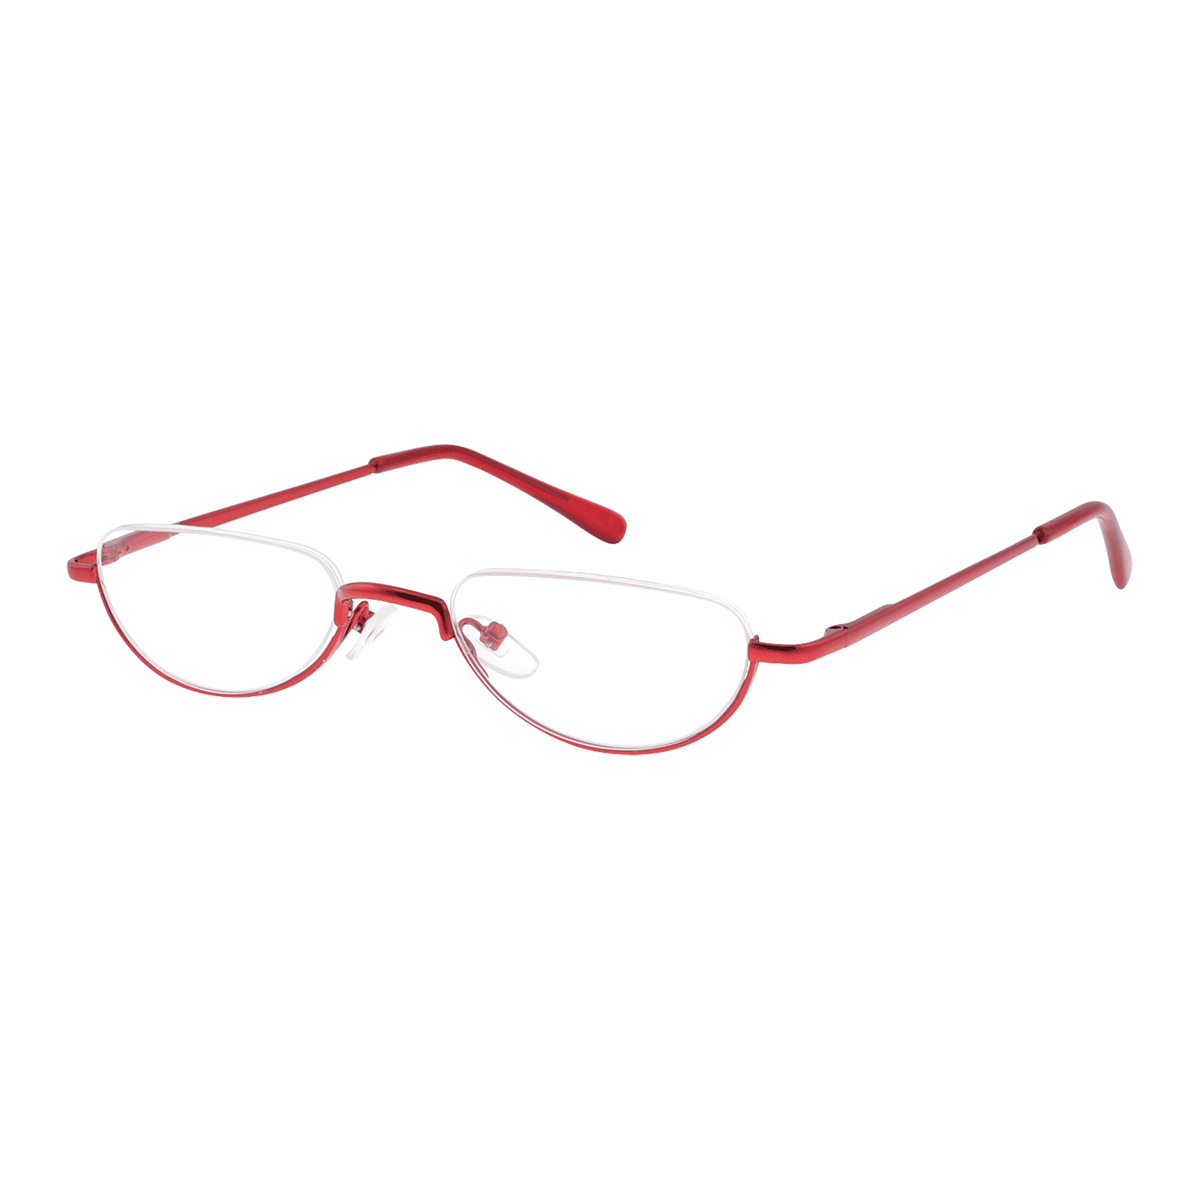 Canyon - Oval Red Reading Glasses for Men & Women